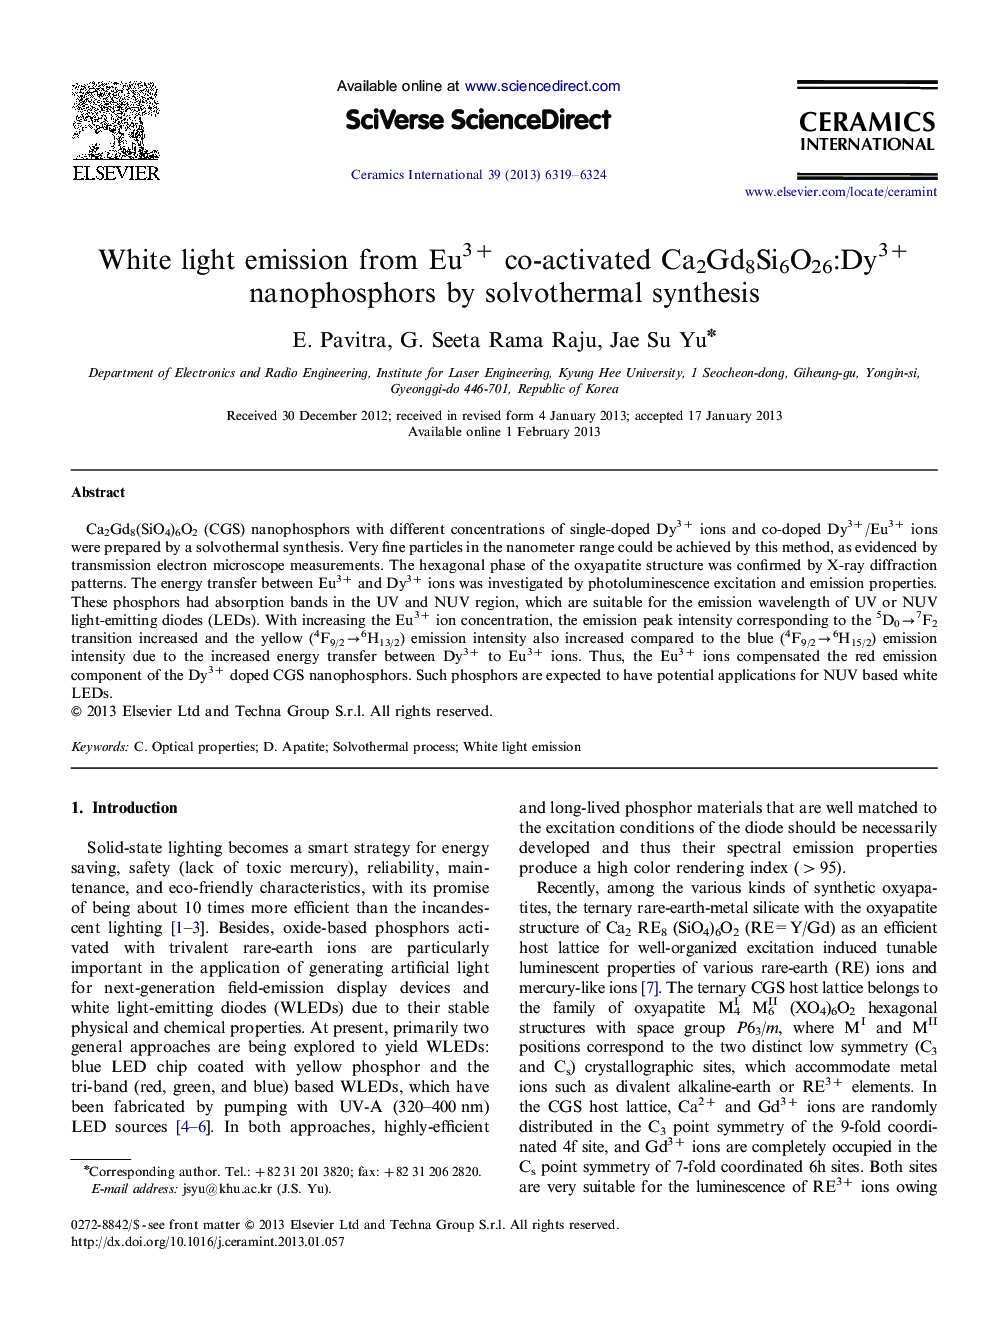 White light emission from Eu3+ co-activated Ca2Gd8Si6O26:Dy3+ nanophosphors by solvothermalsynthesis